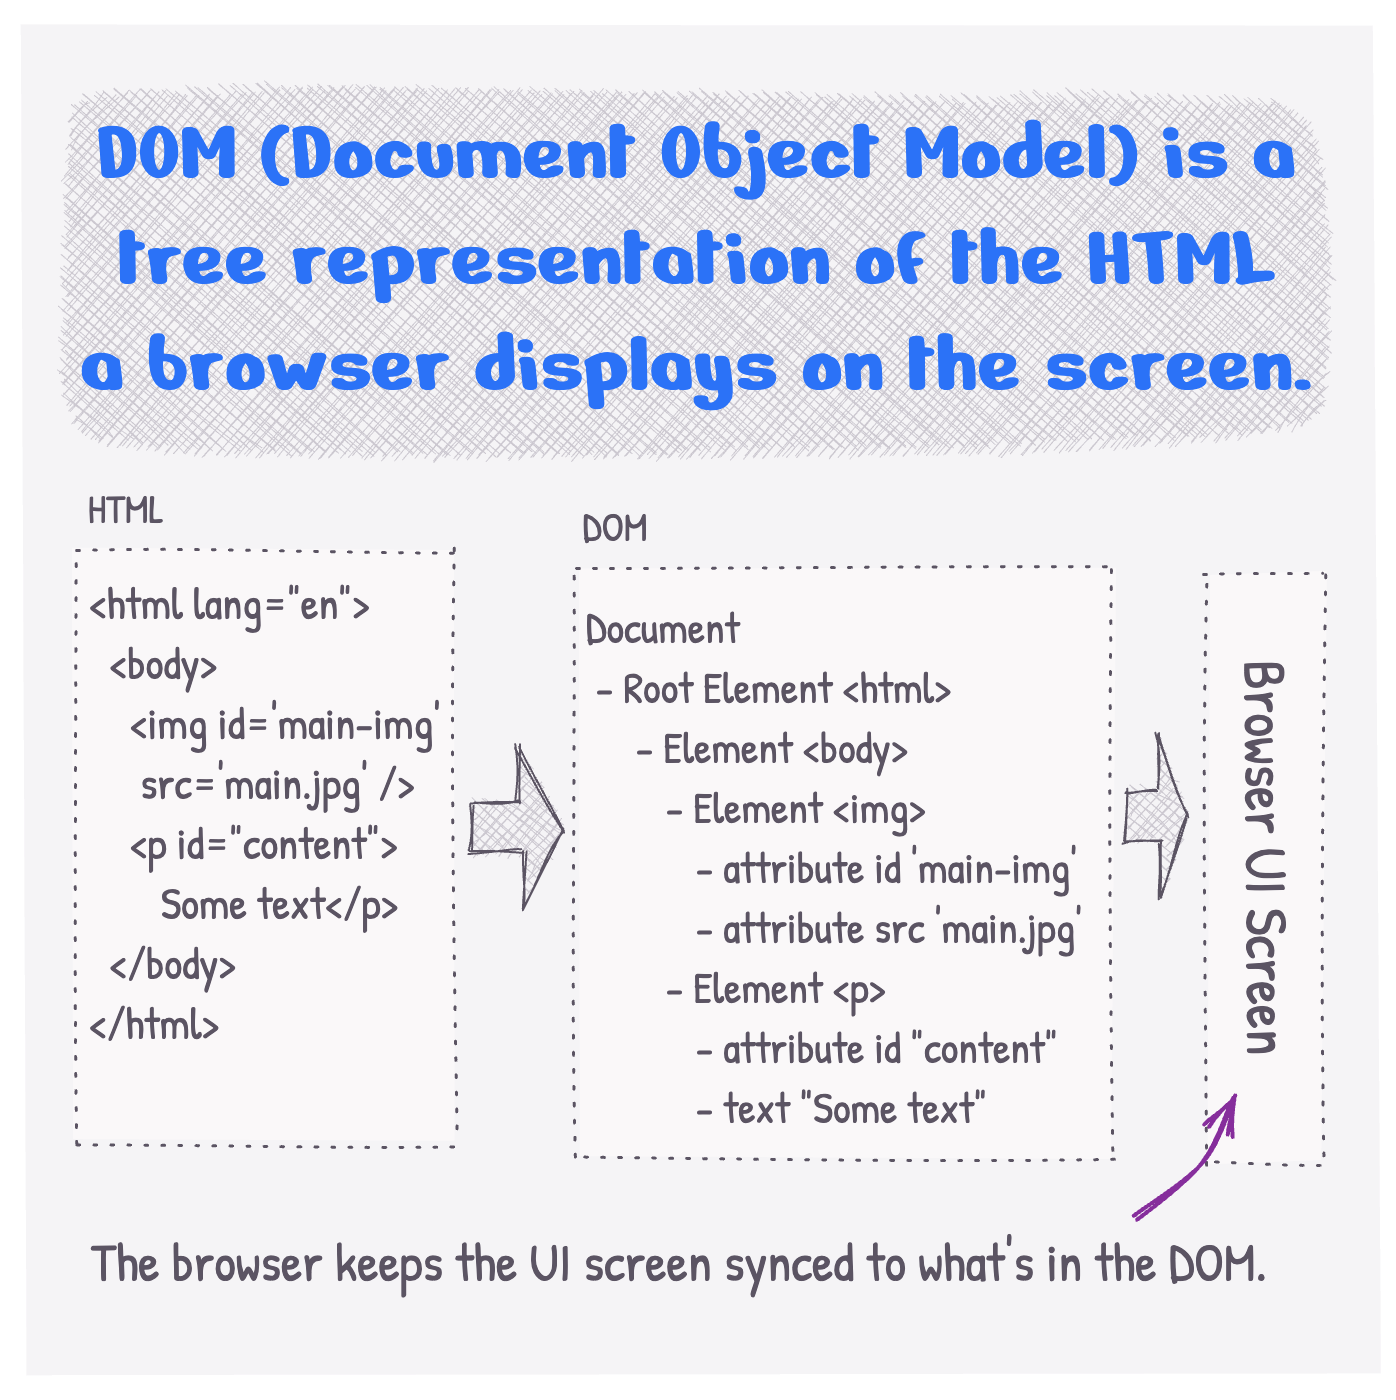 DOM (Document Object Model) is a tree representation of the HTML a browser displays on the screen. The browser keeps the UI screen synced to what's in the DOM.